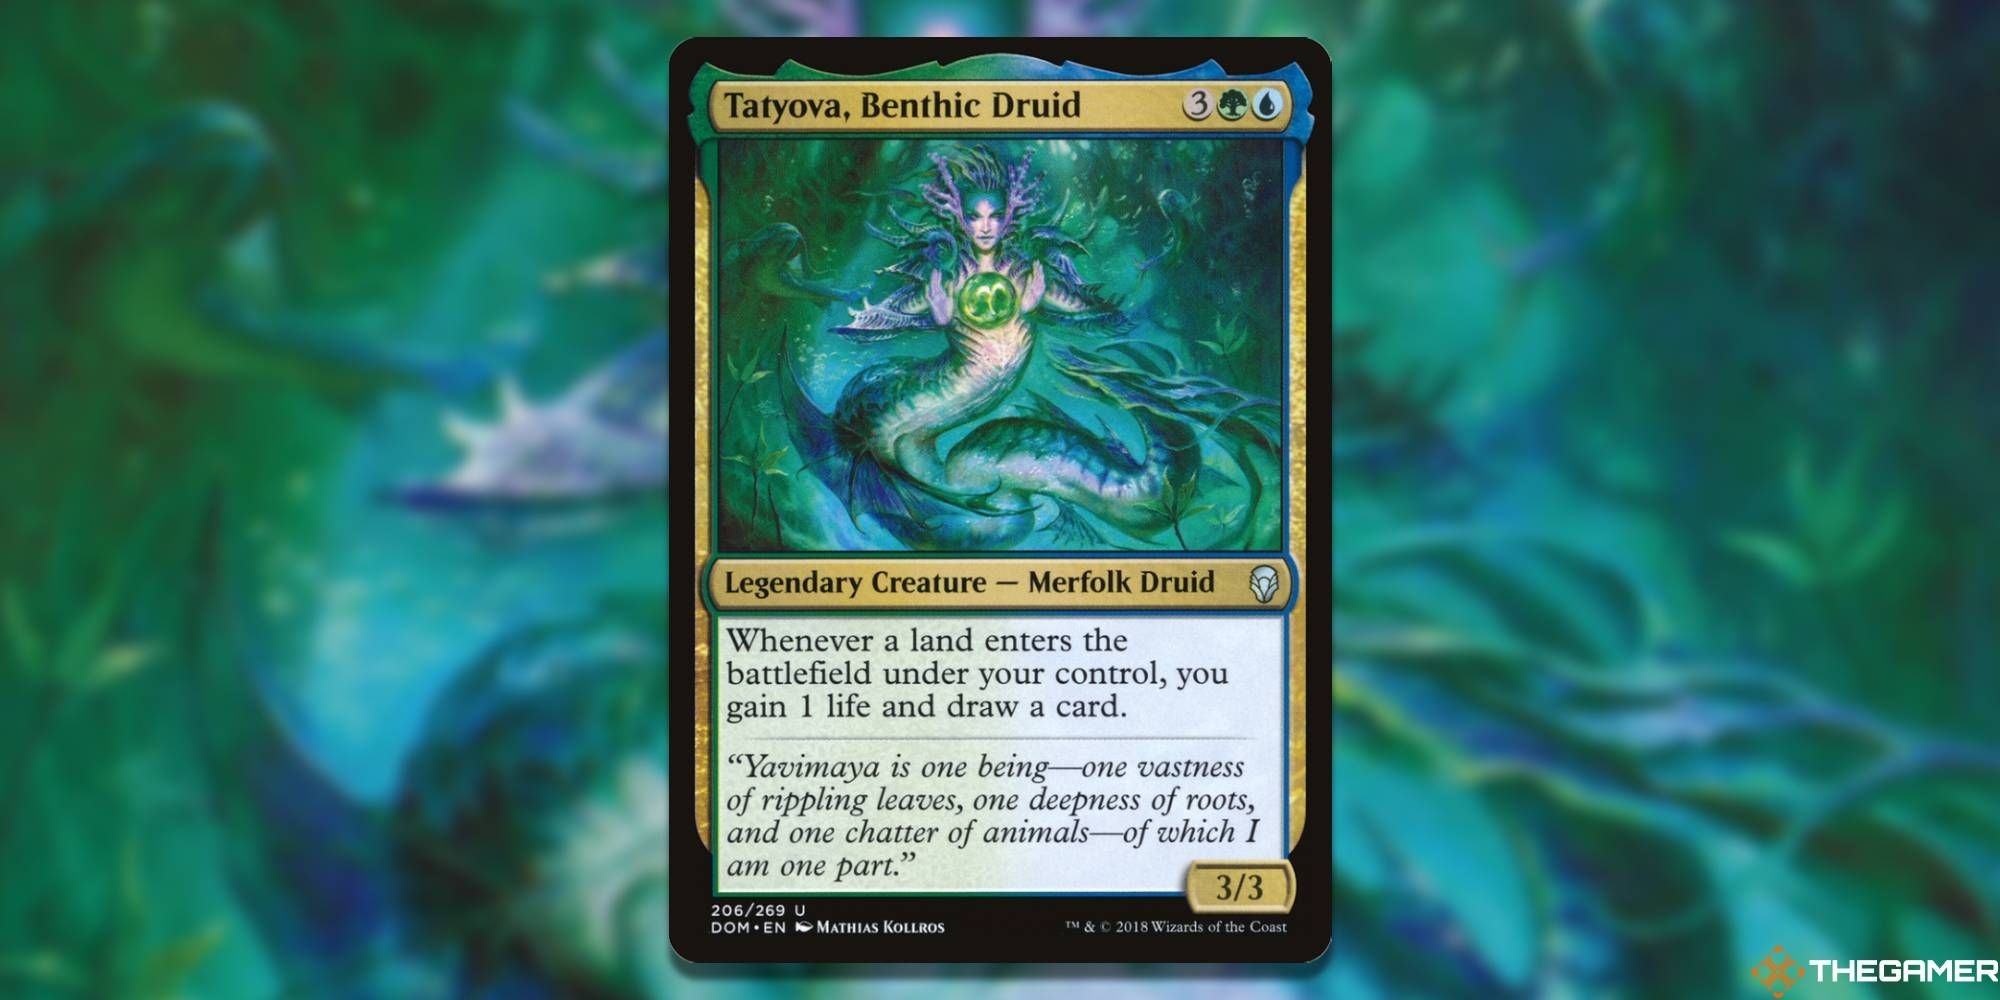 Image of the Tatyova, Benthic Druid card in Magic: The Gathering, with art by Mathias Kollros